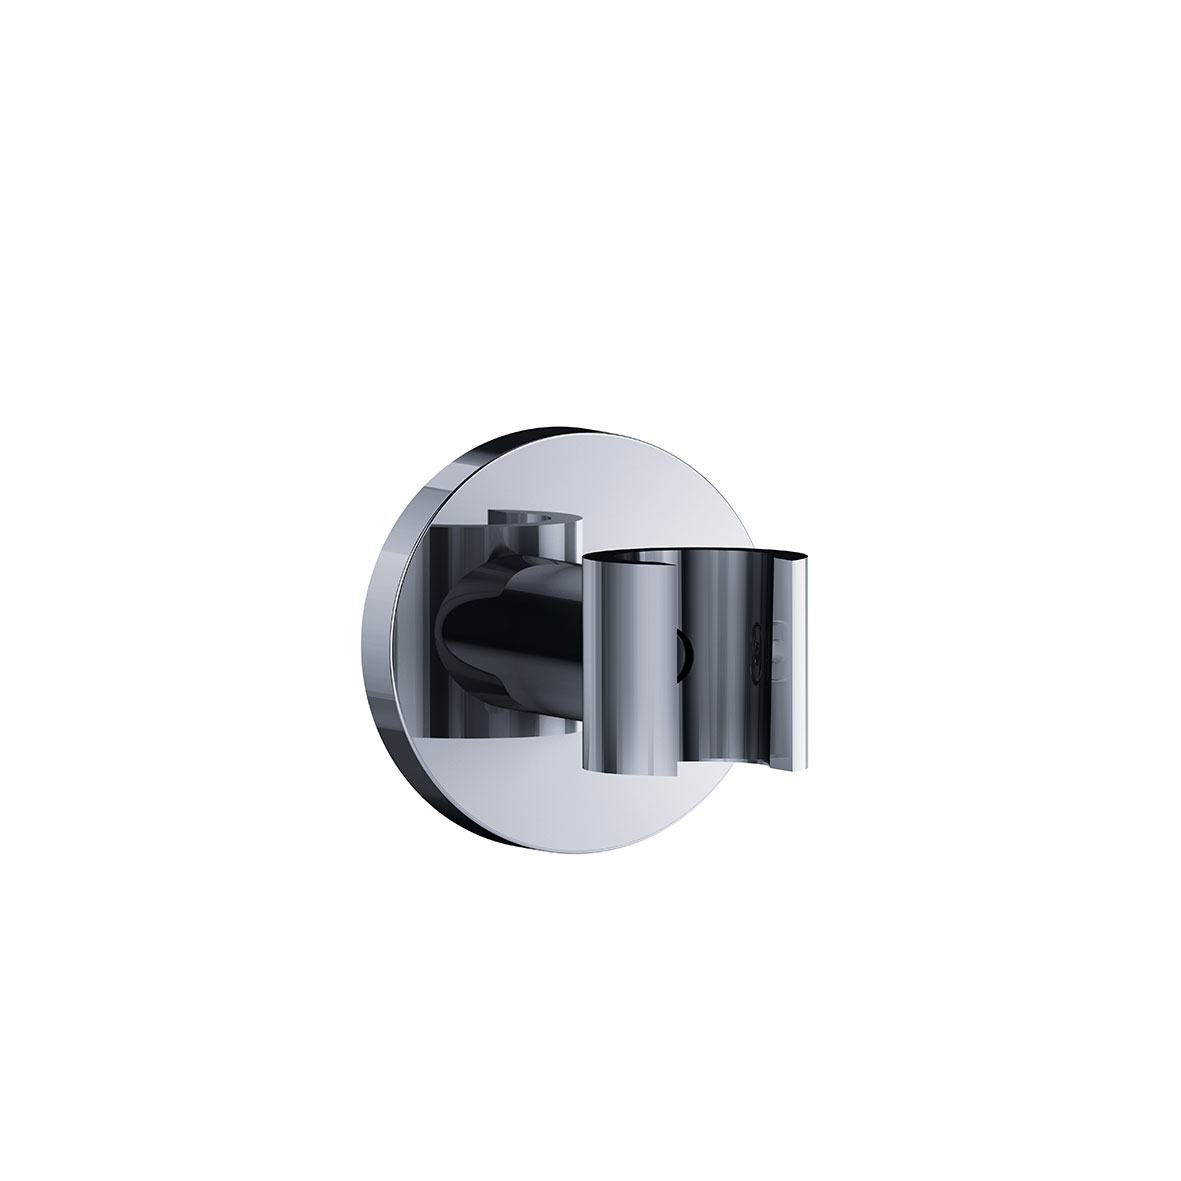 Shower mixer - Wall fitting for hand shower - Article No. 632.13.270.xxx